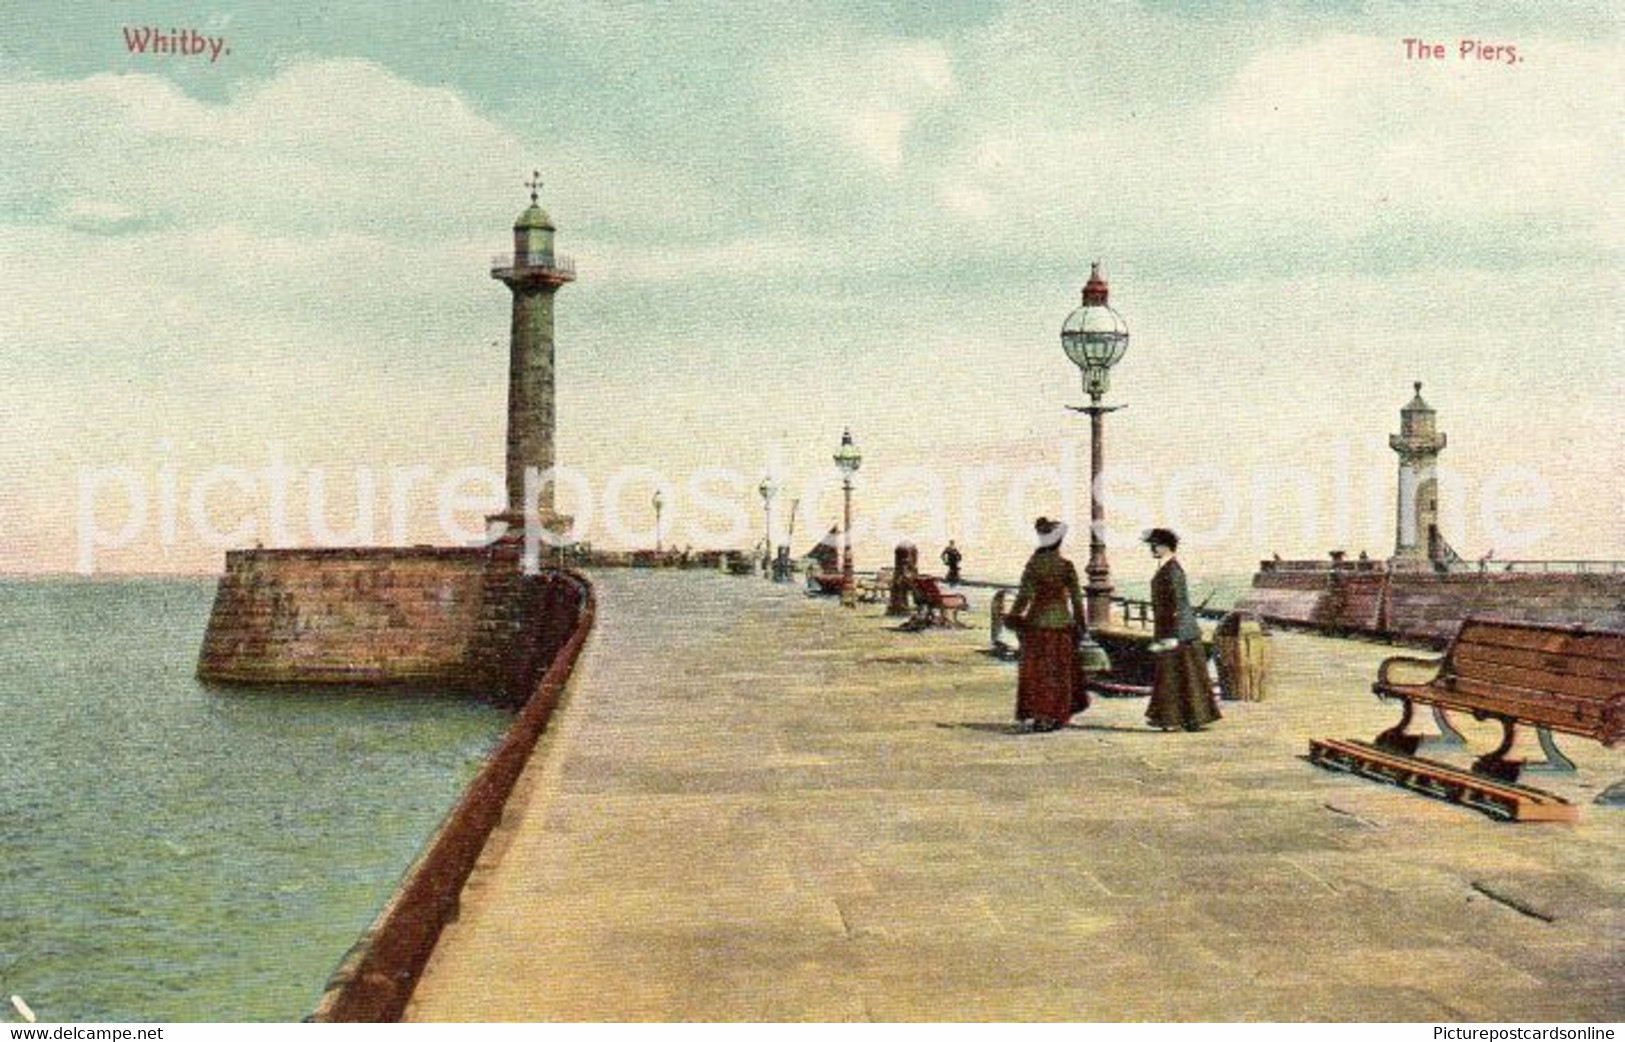 WHITBY THE PIERS OLD COLOUR POSTCARD YORKSHIRE - Whitby